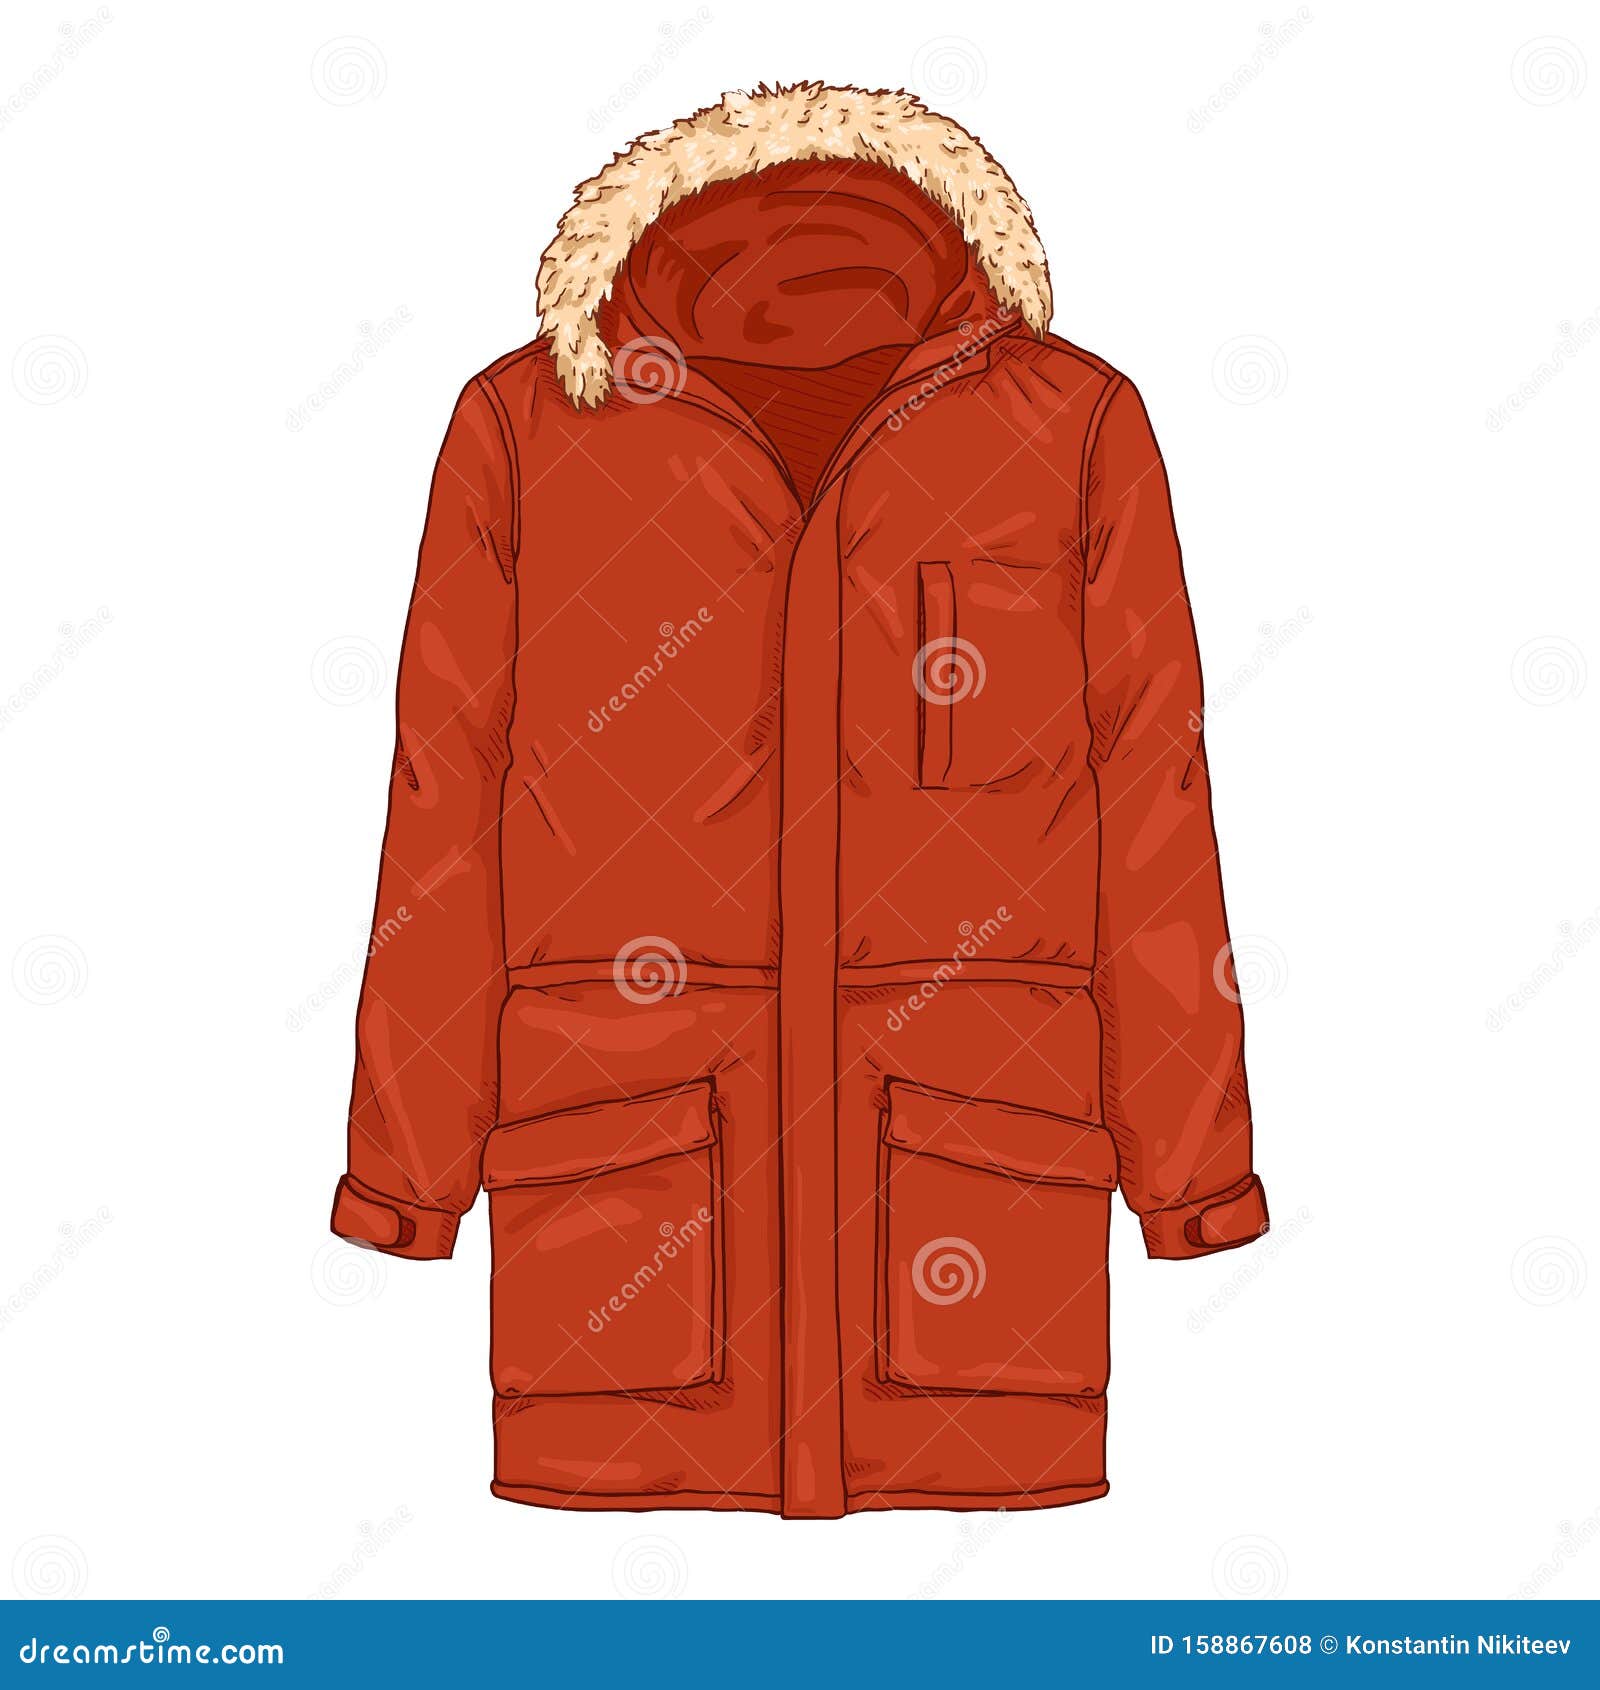 Parka In Cartoon Style Stiker On White Background On Isolated ...